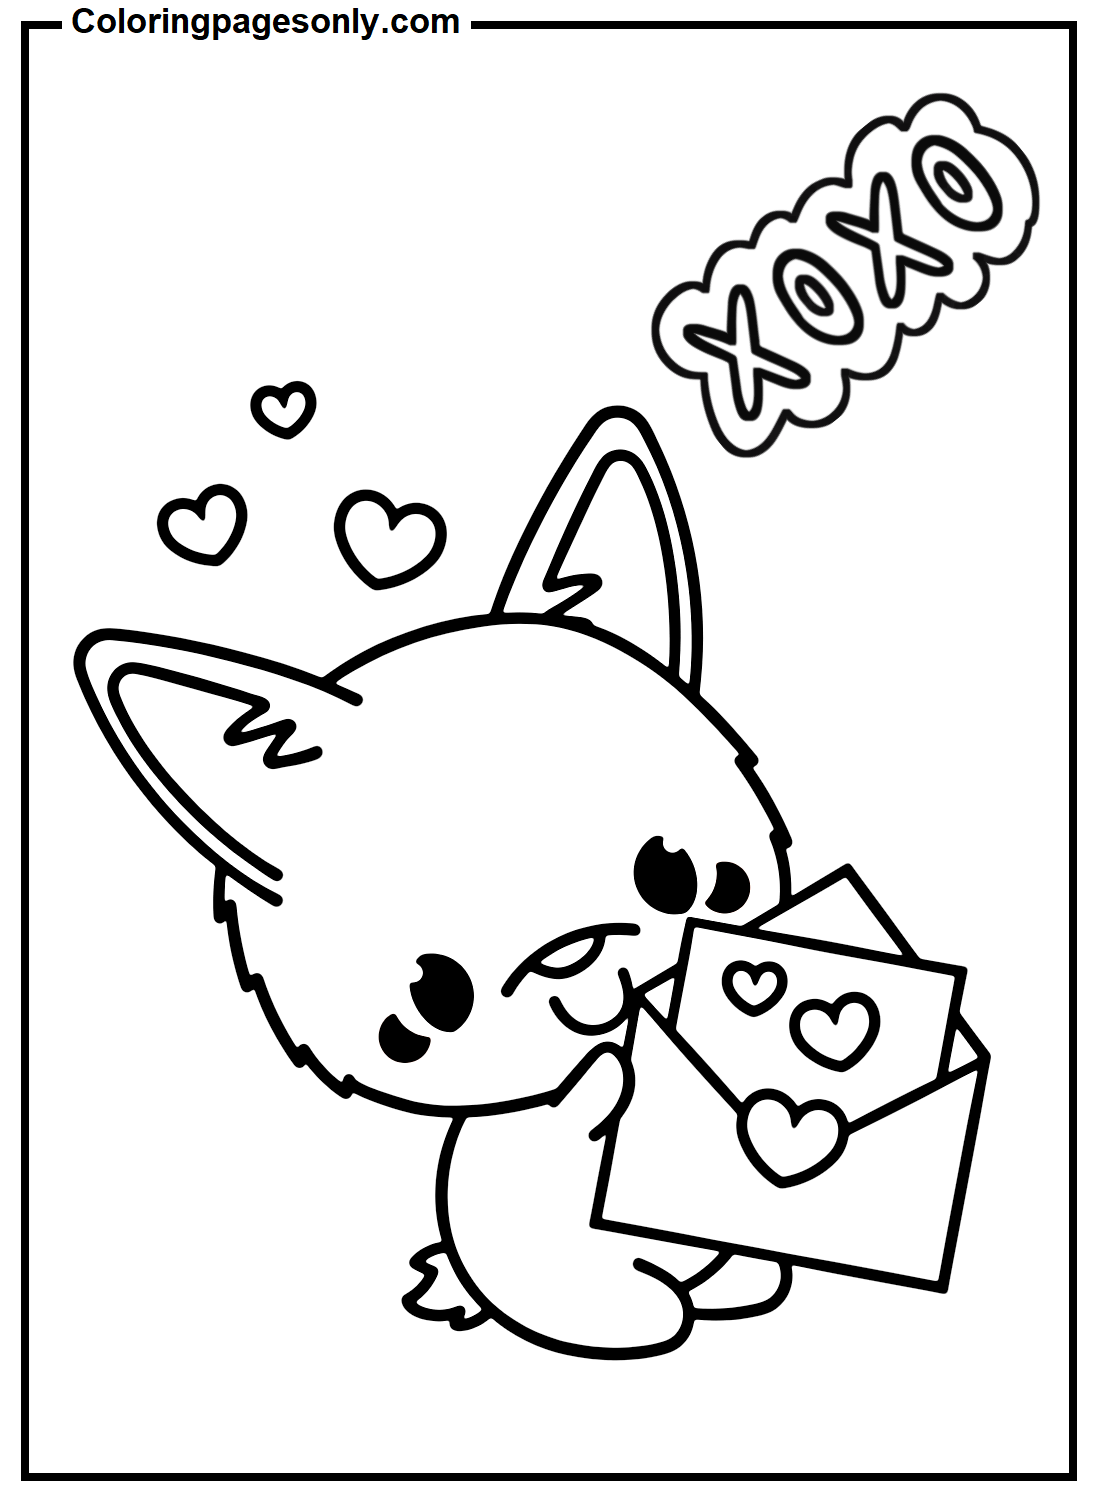 Welsh Corgi In Valentine's Day Coloring Pages